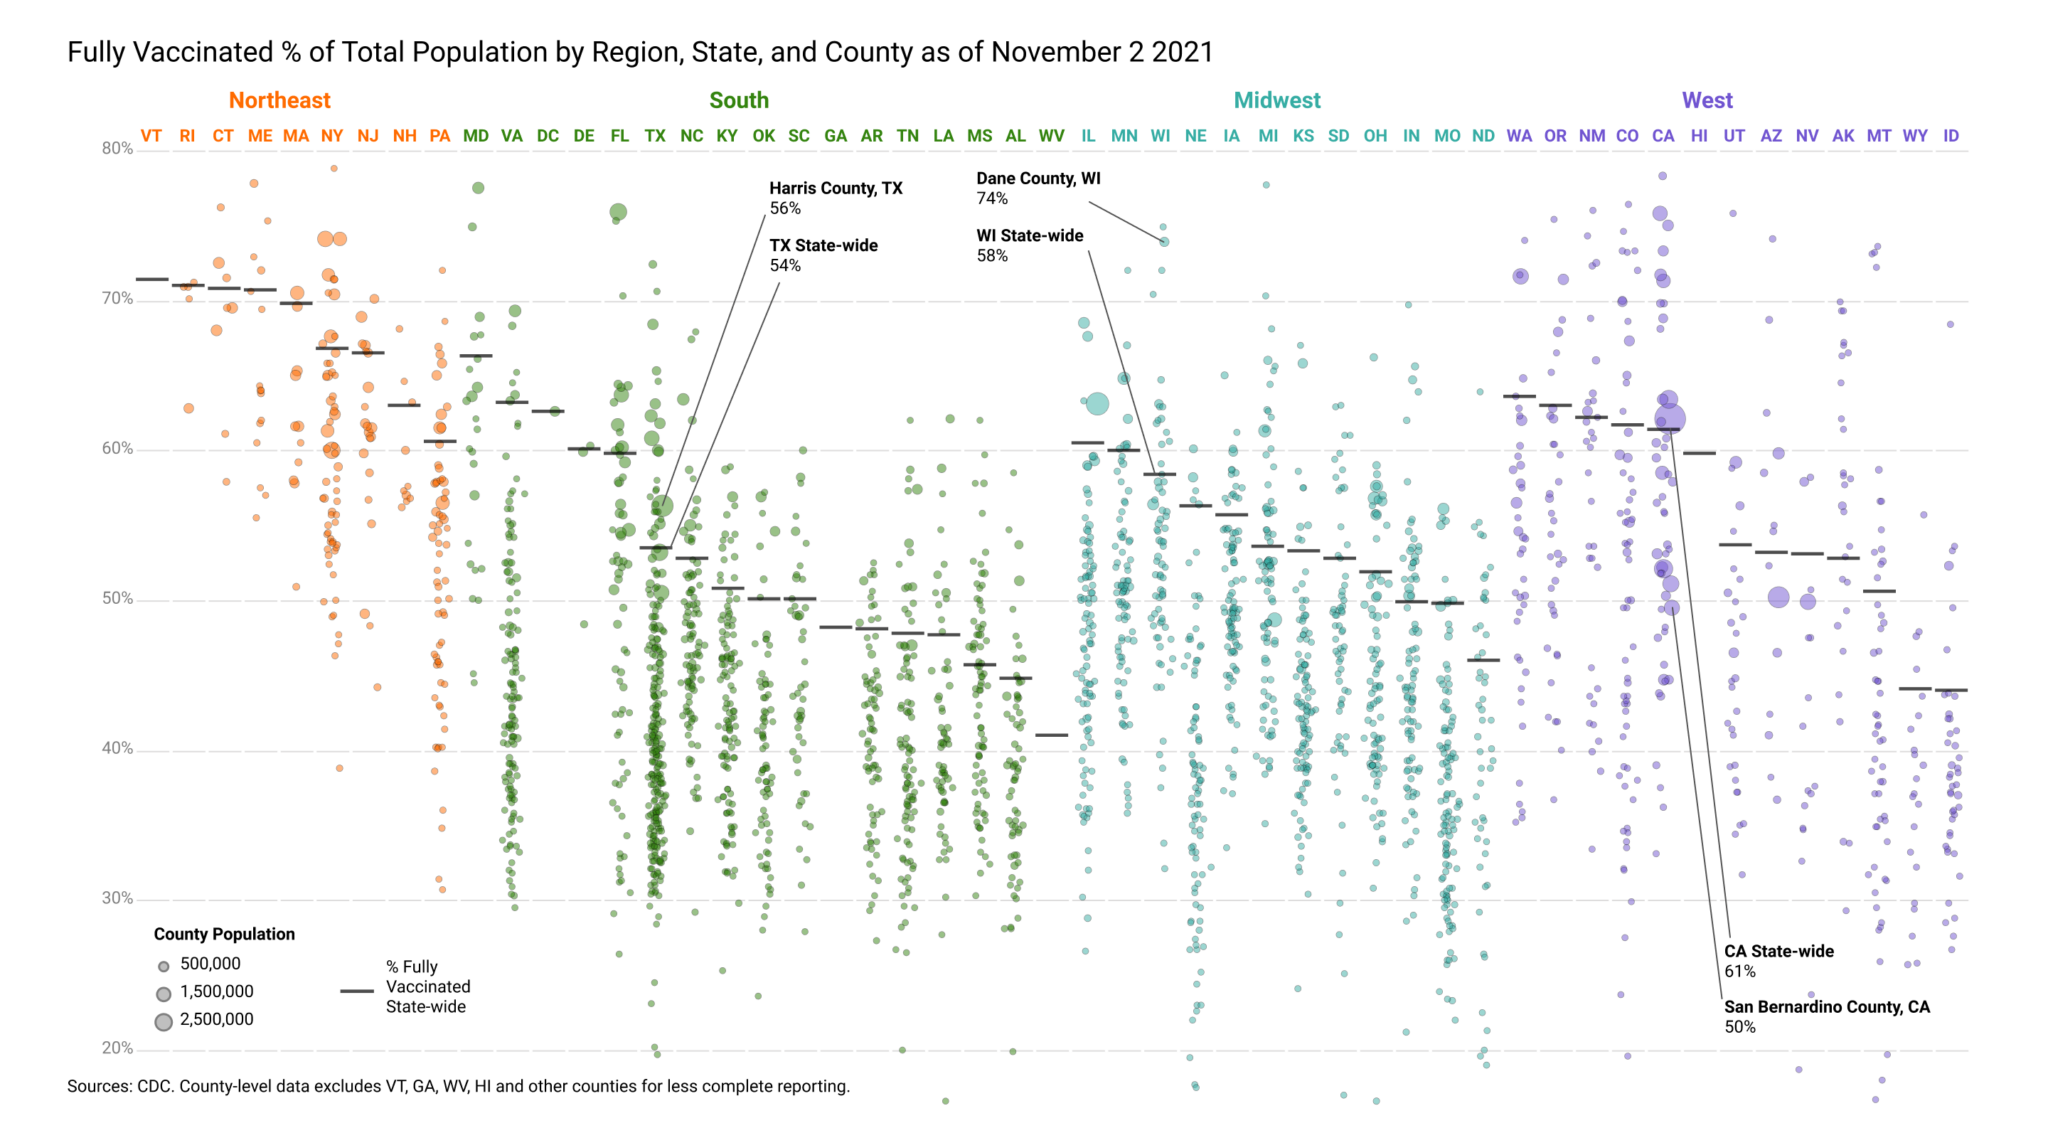 Scatter plots showing fully vaccinated % of population per county, per state, and per US region as of Nov 2, 2021.